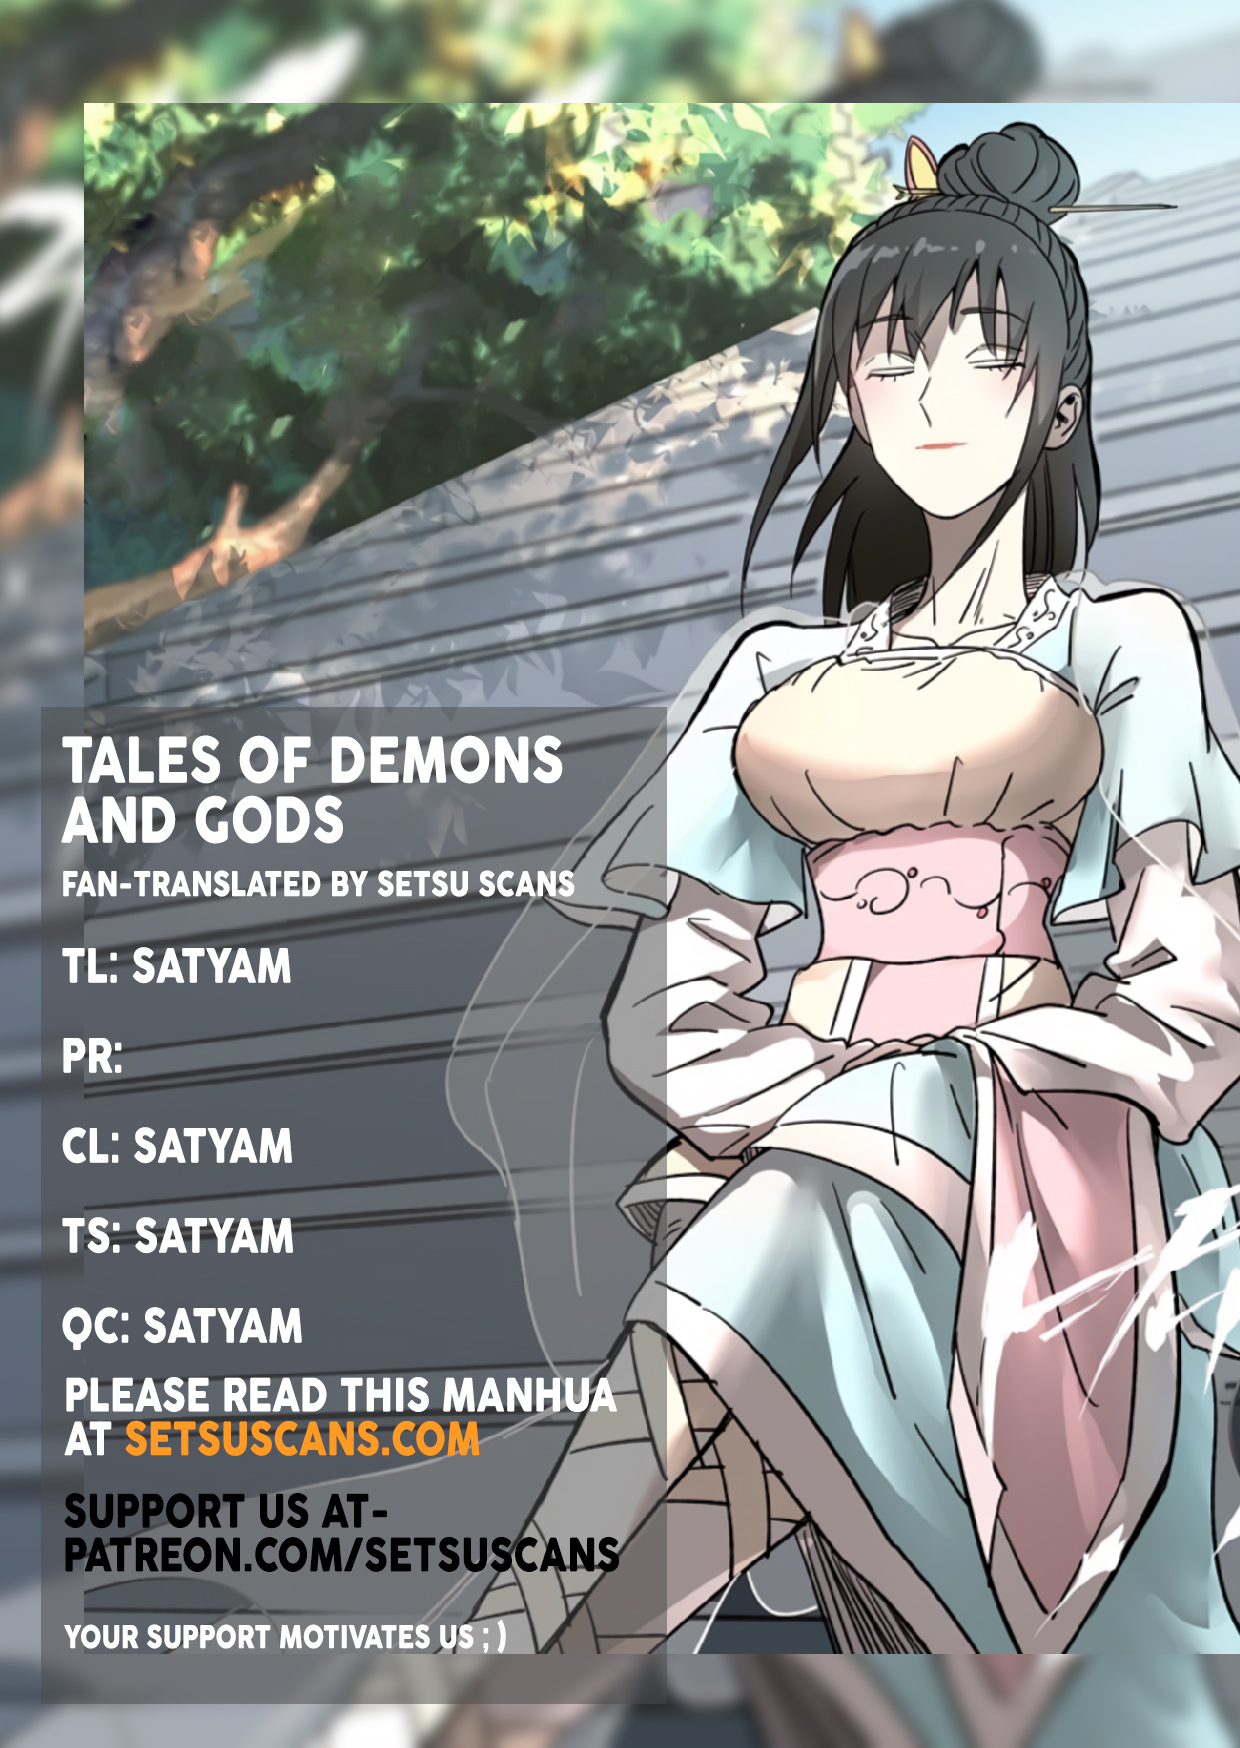 Tales of Demons and Gods - Chapter 31977 - The Book of Time and Space Demonic Spirits (1) - Image 1